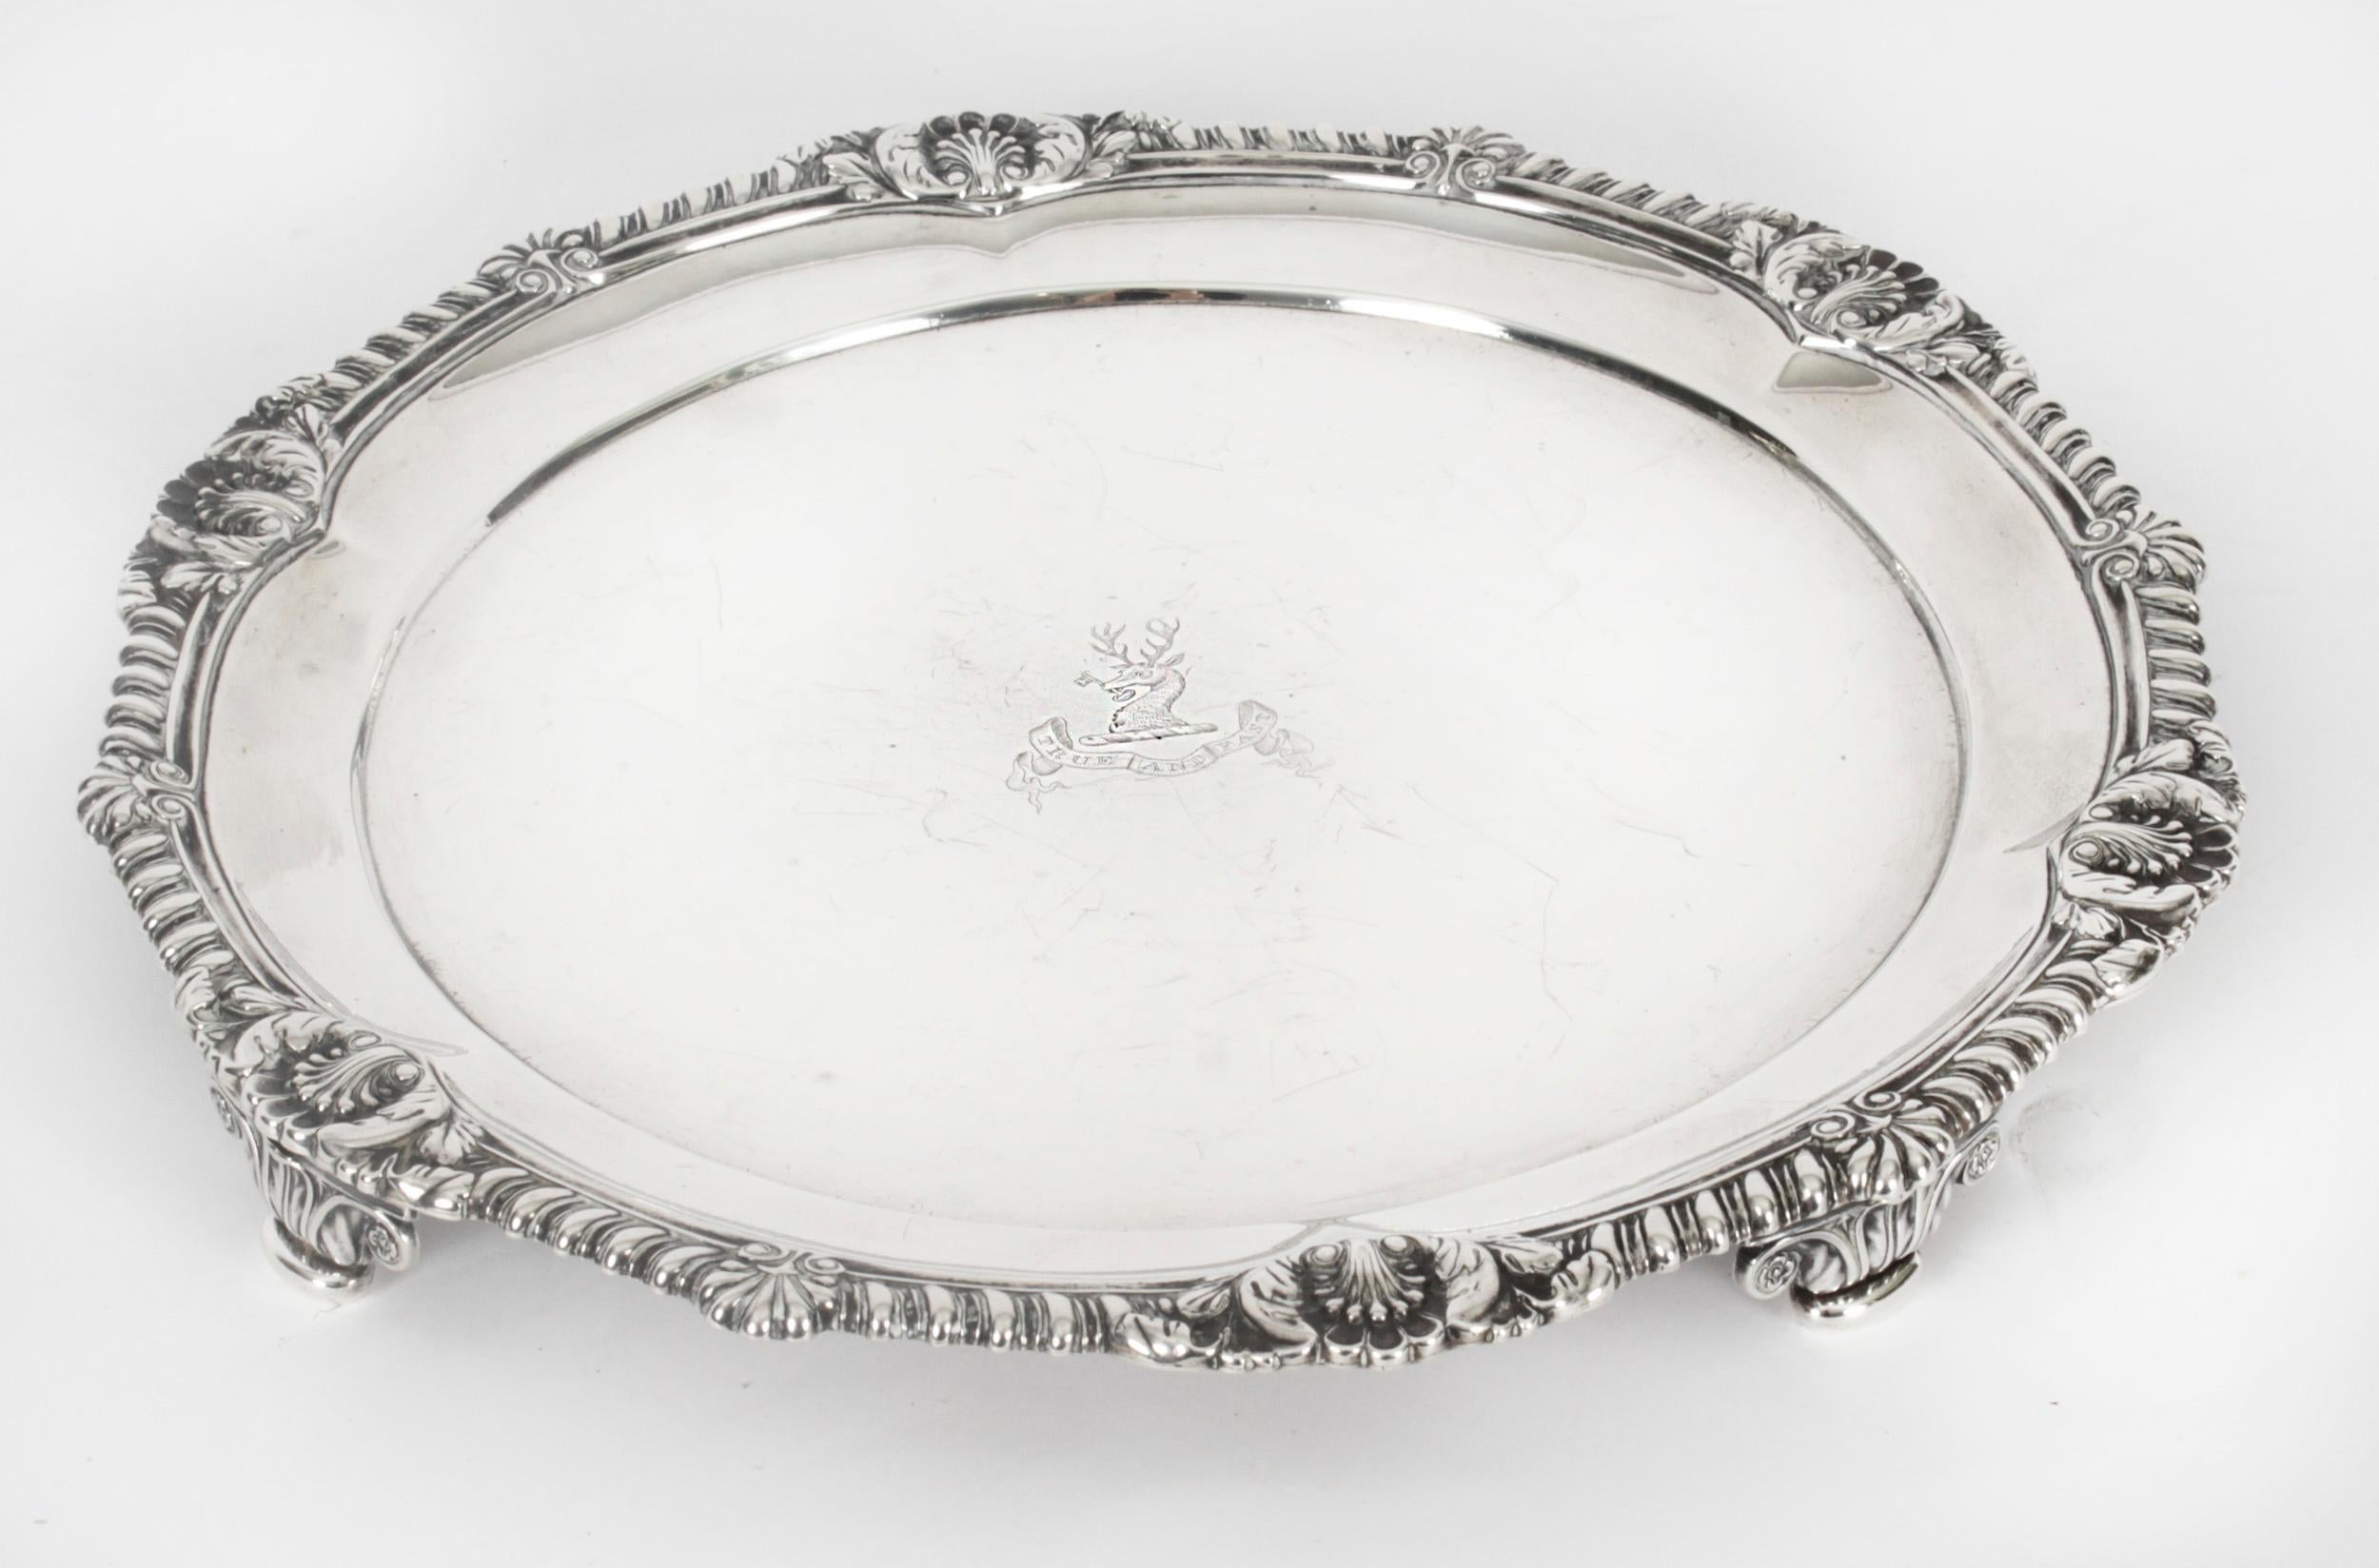 This is a wonderful English antique George III sterling silver 10 inch salver, by the world famous silversmith Paul Storr.

It has clear hallmarks for London 1811 and the makers mark of Paul Storr.

It is typical of his work with the raised